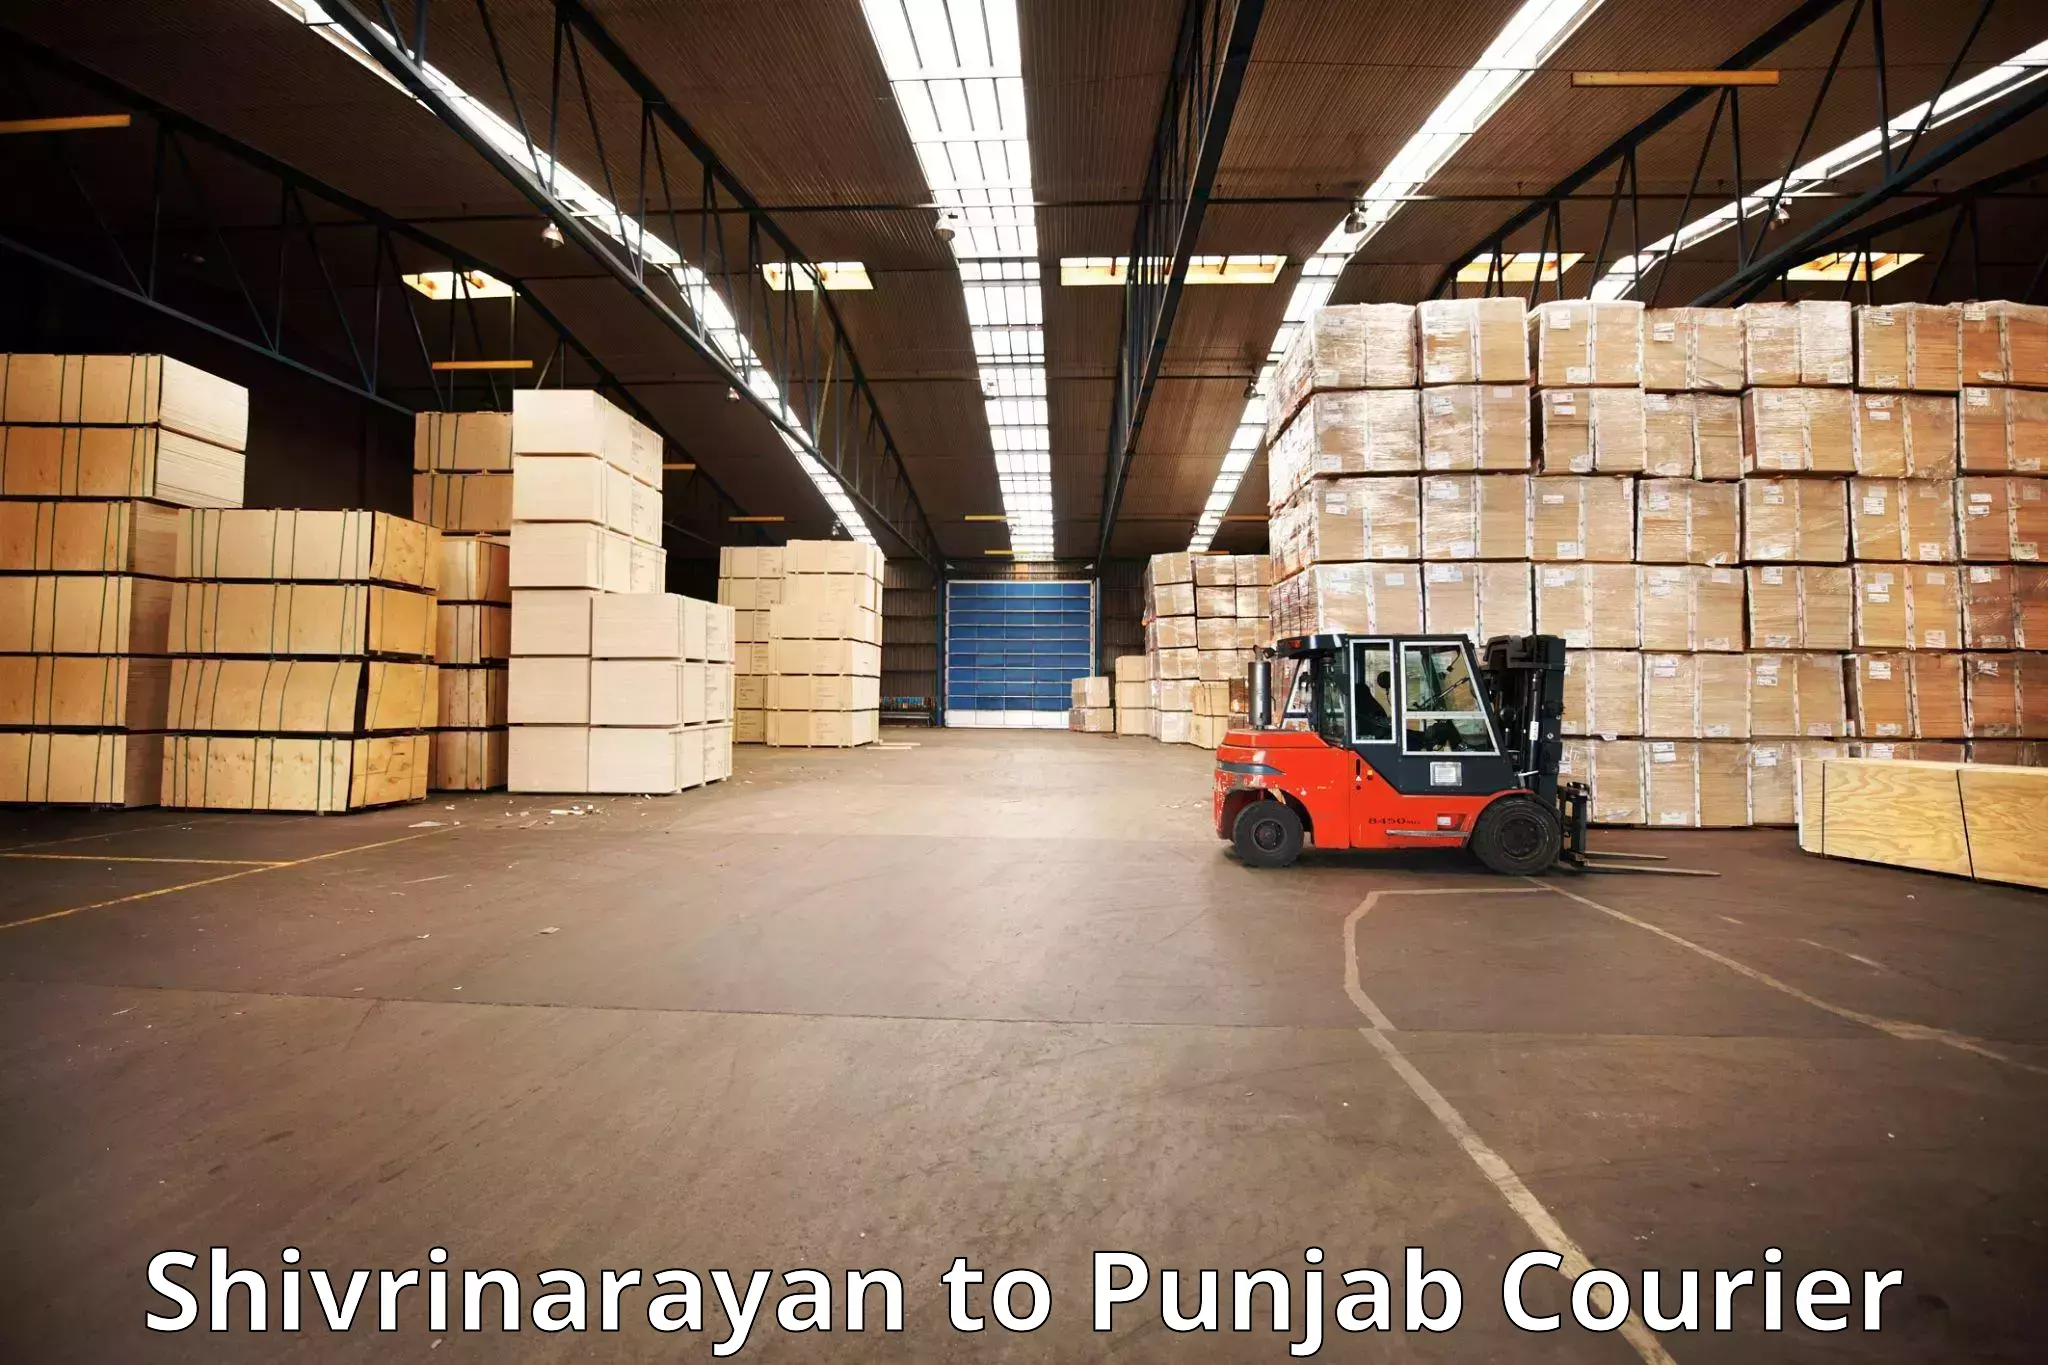 Luggage transport consultancy Shivrinarayan to Ropar